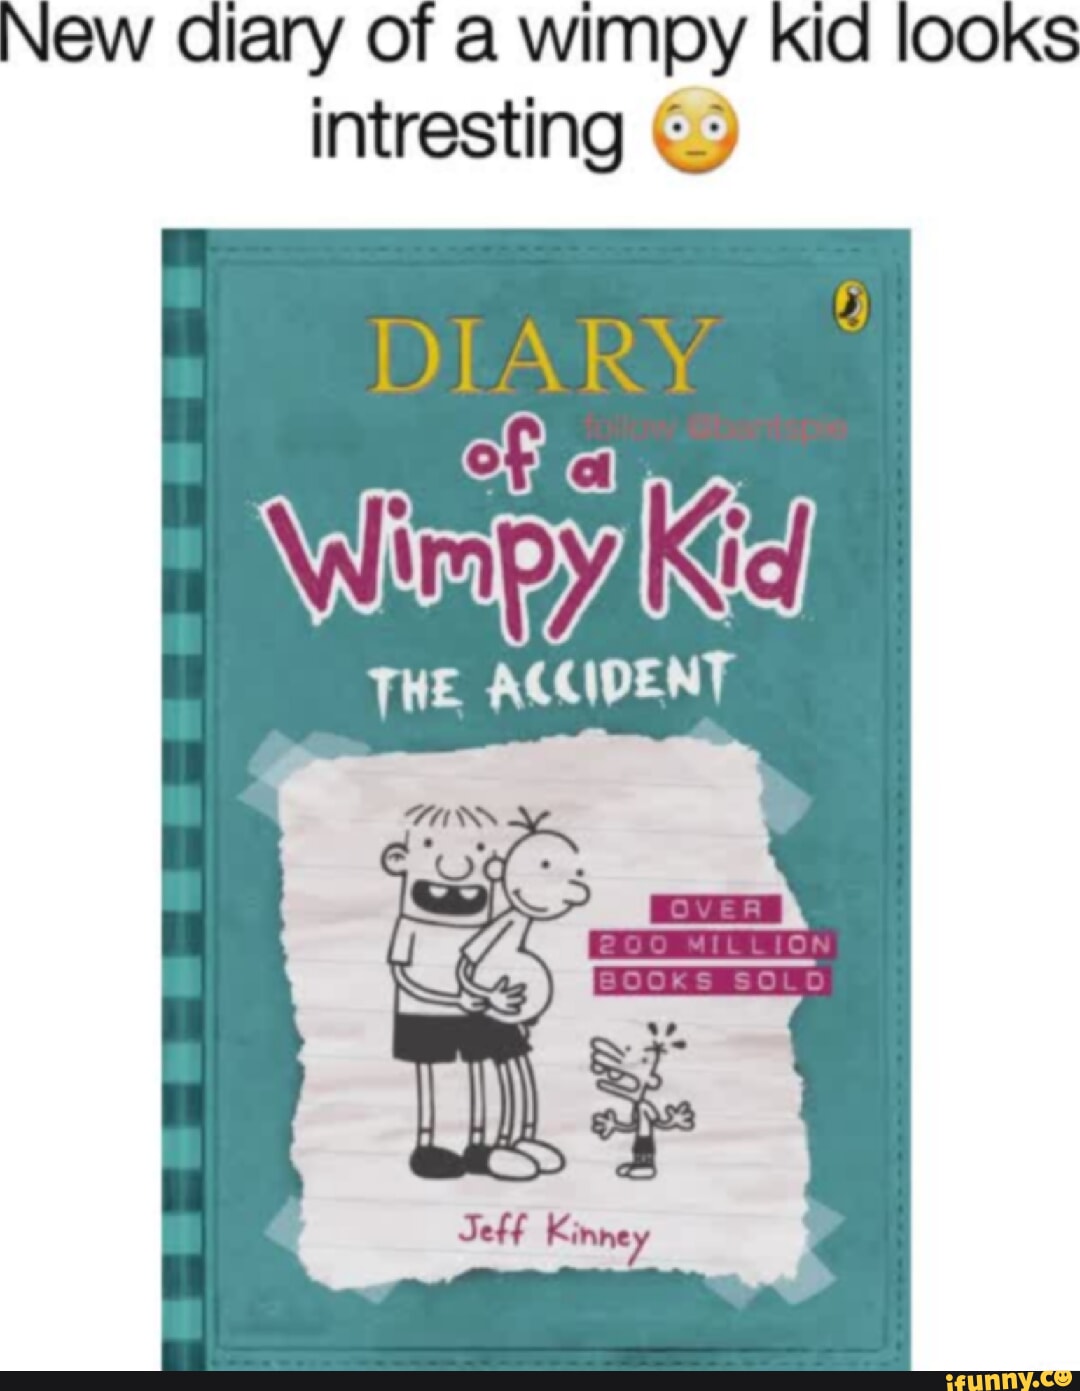 New diary of a wimpy kid looks intresting Wwimpya Kid THE ACCIDENT - iFunny